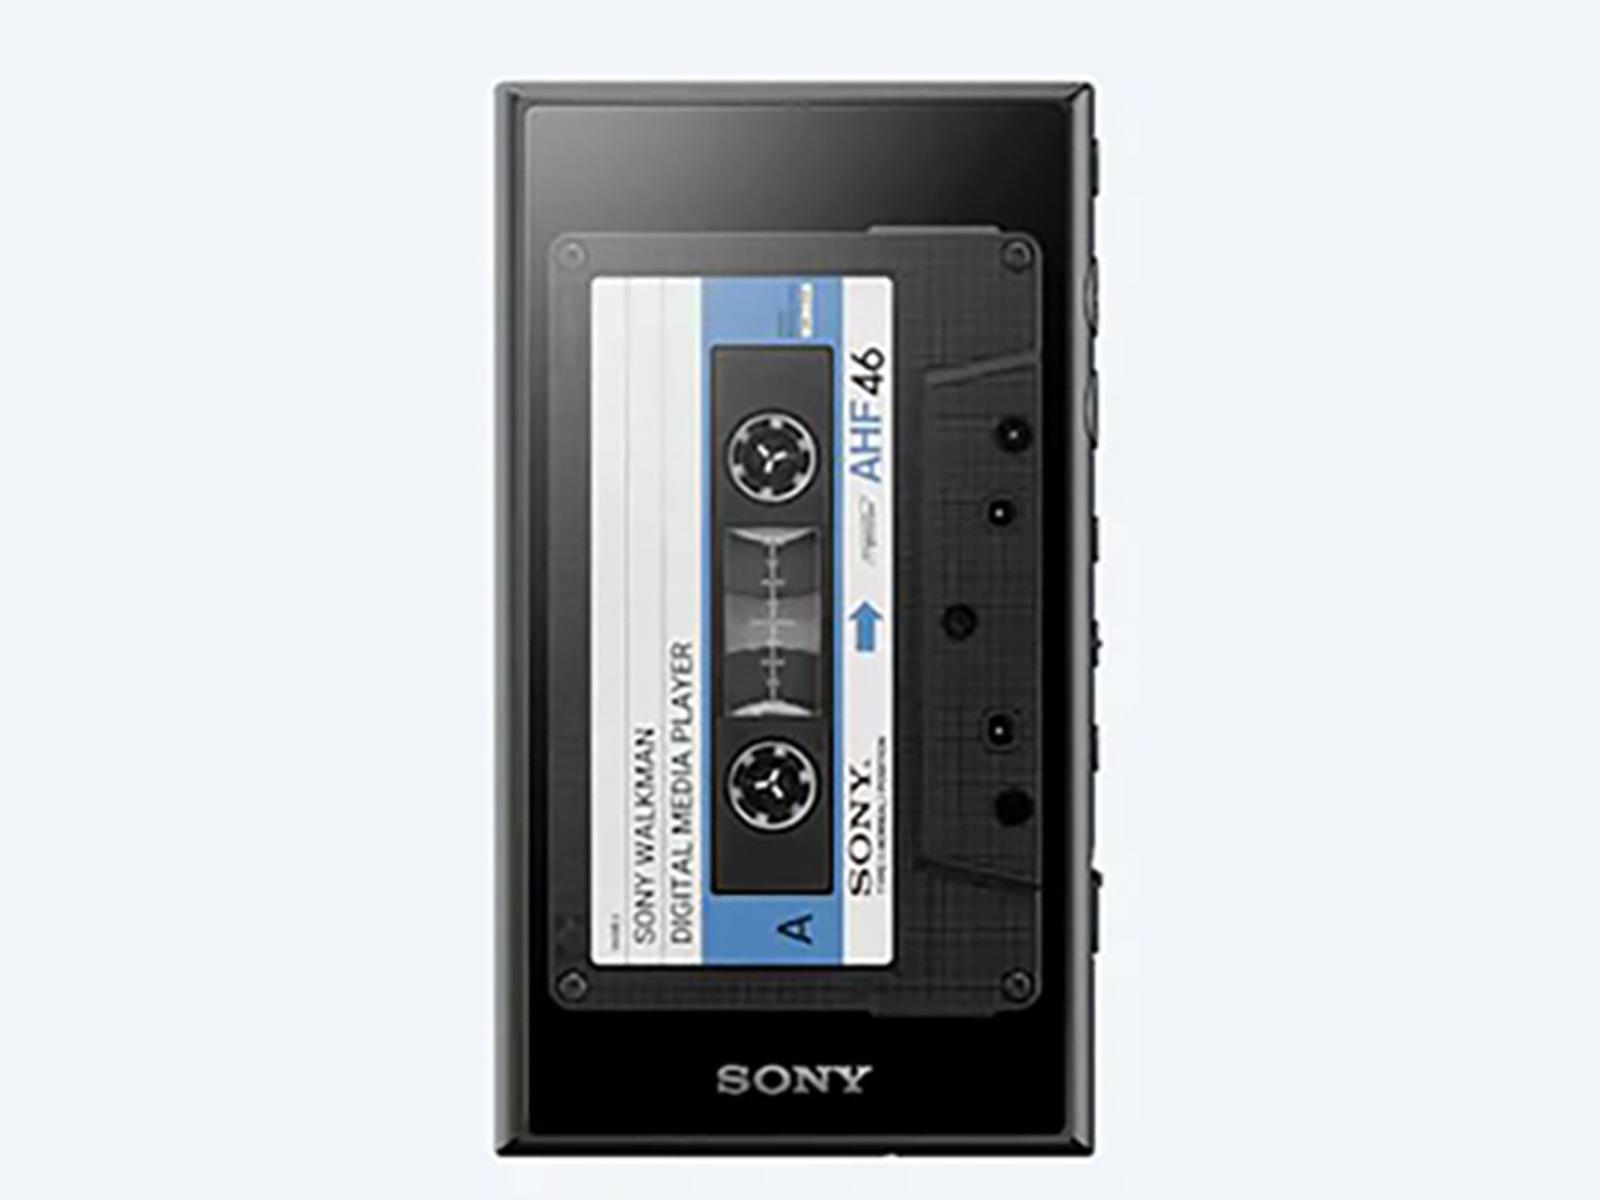 Sony S 40th Anniversary Walkman Released With Iconic Look And Killer Features Hothardware